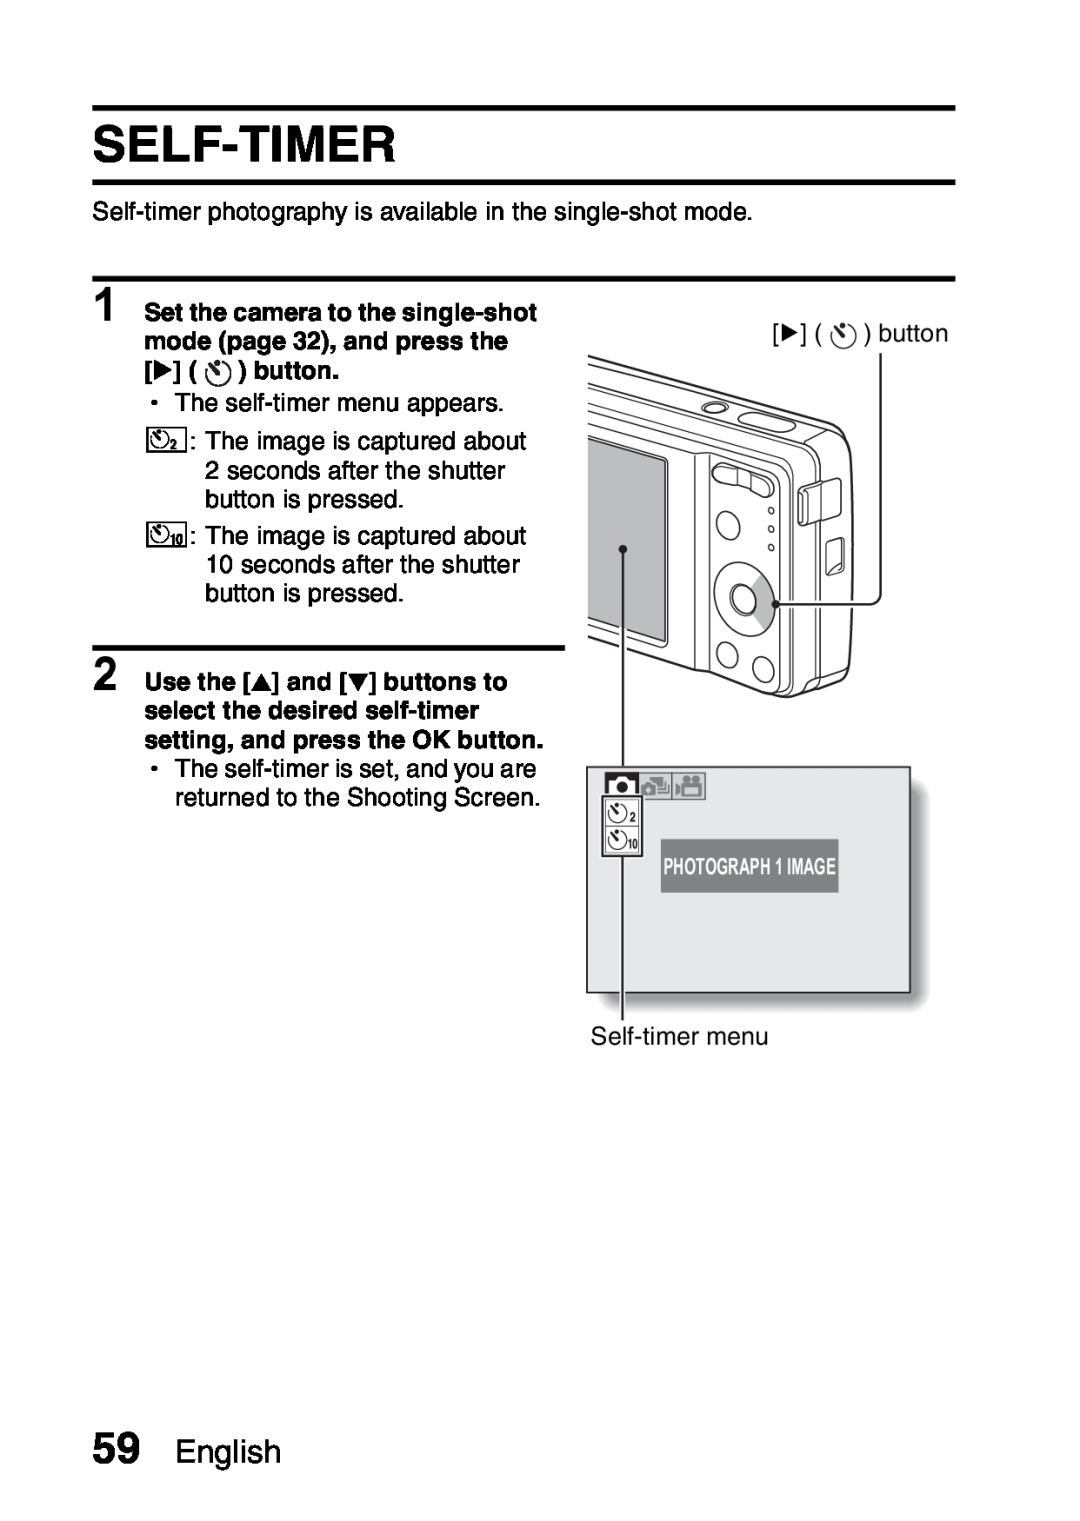 Samsung R50 Self-Timer, English, Set the camera to the single-shot, mode page 32, and press them button m button 